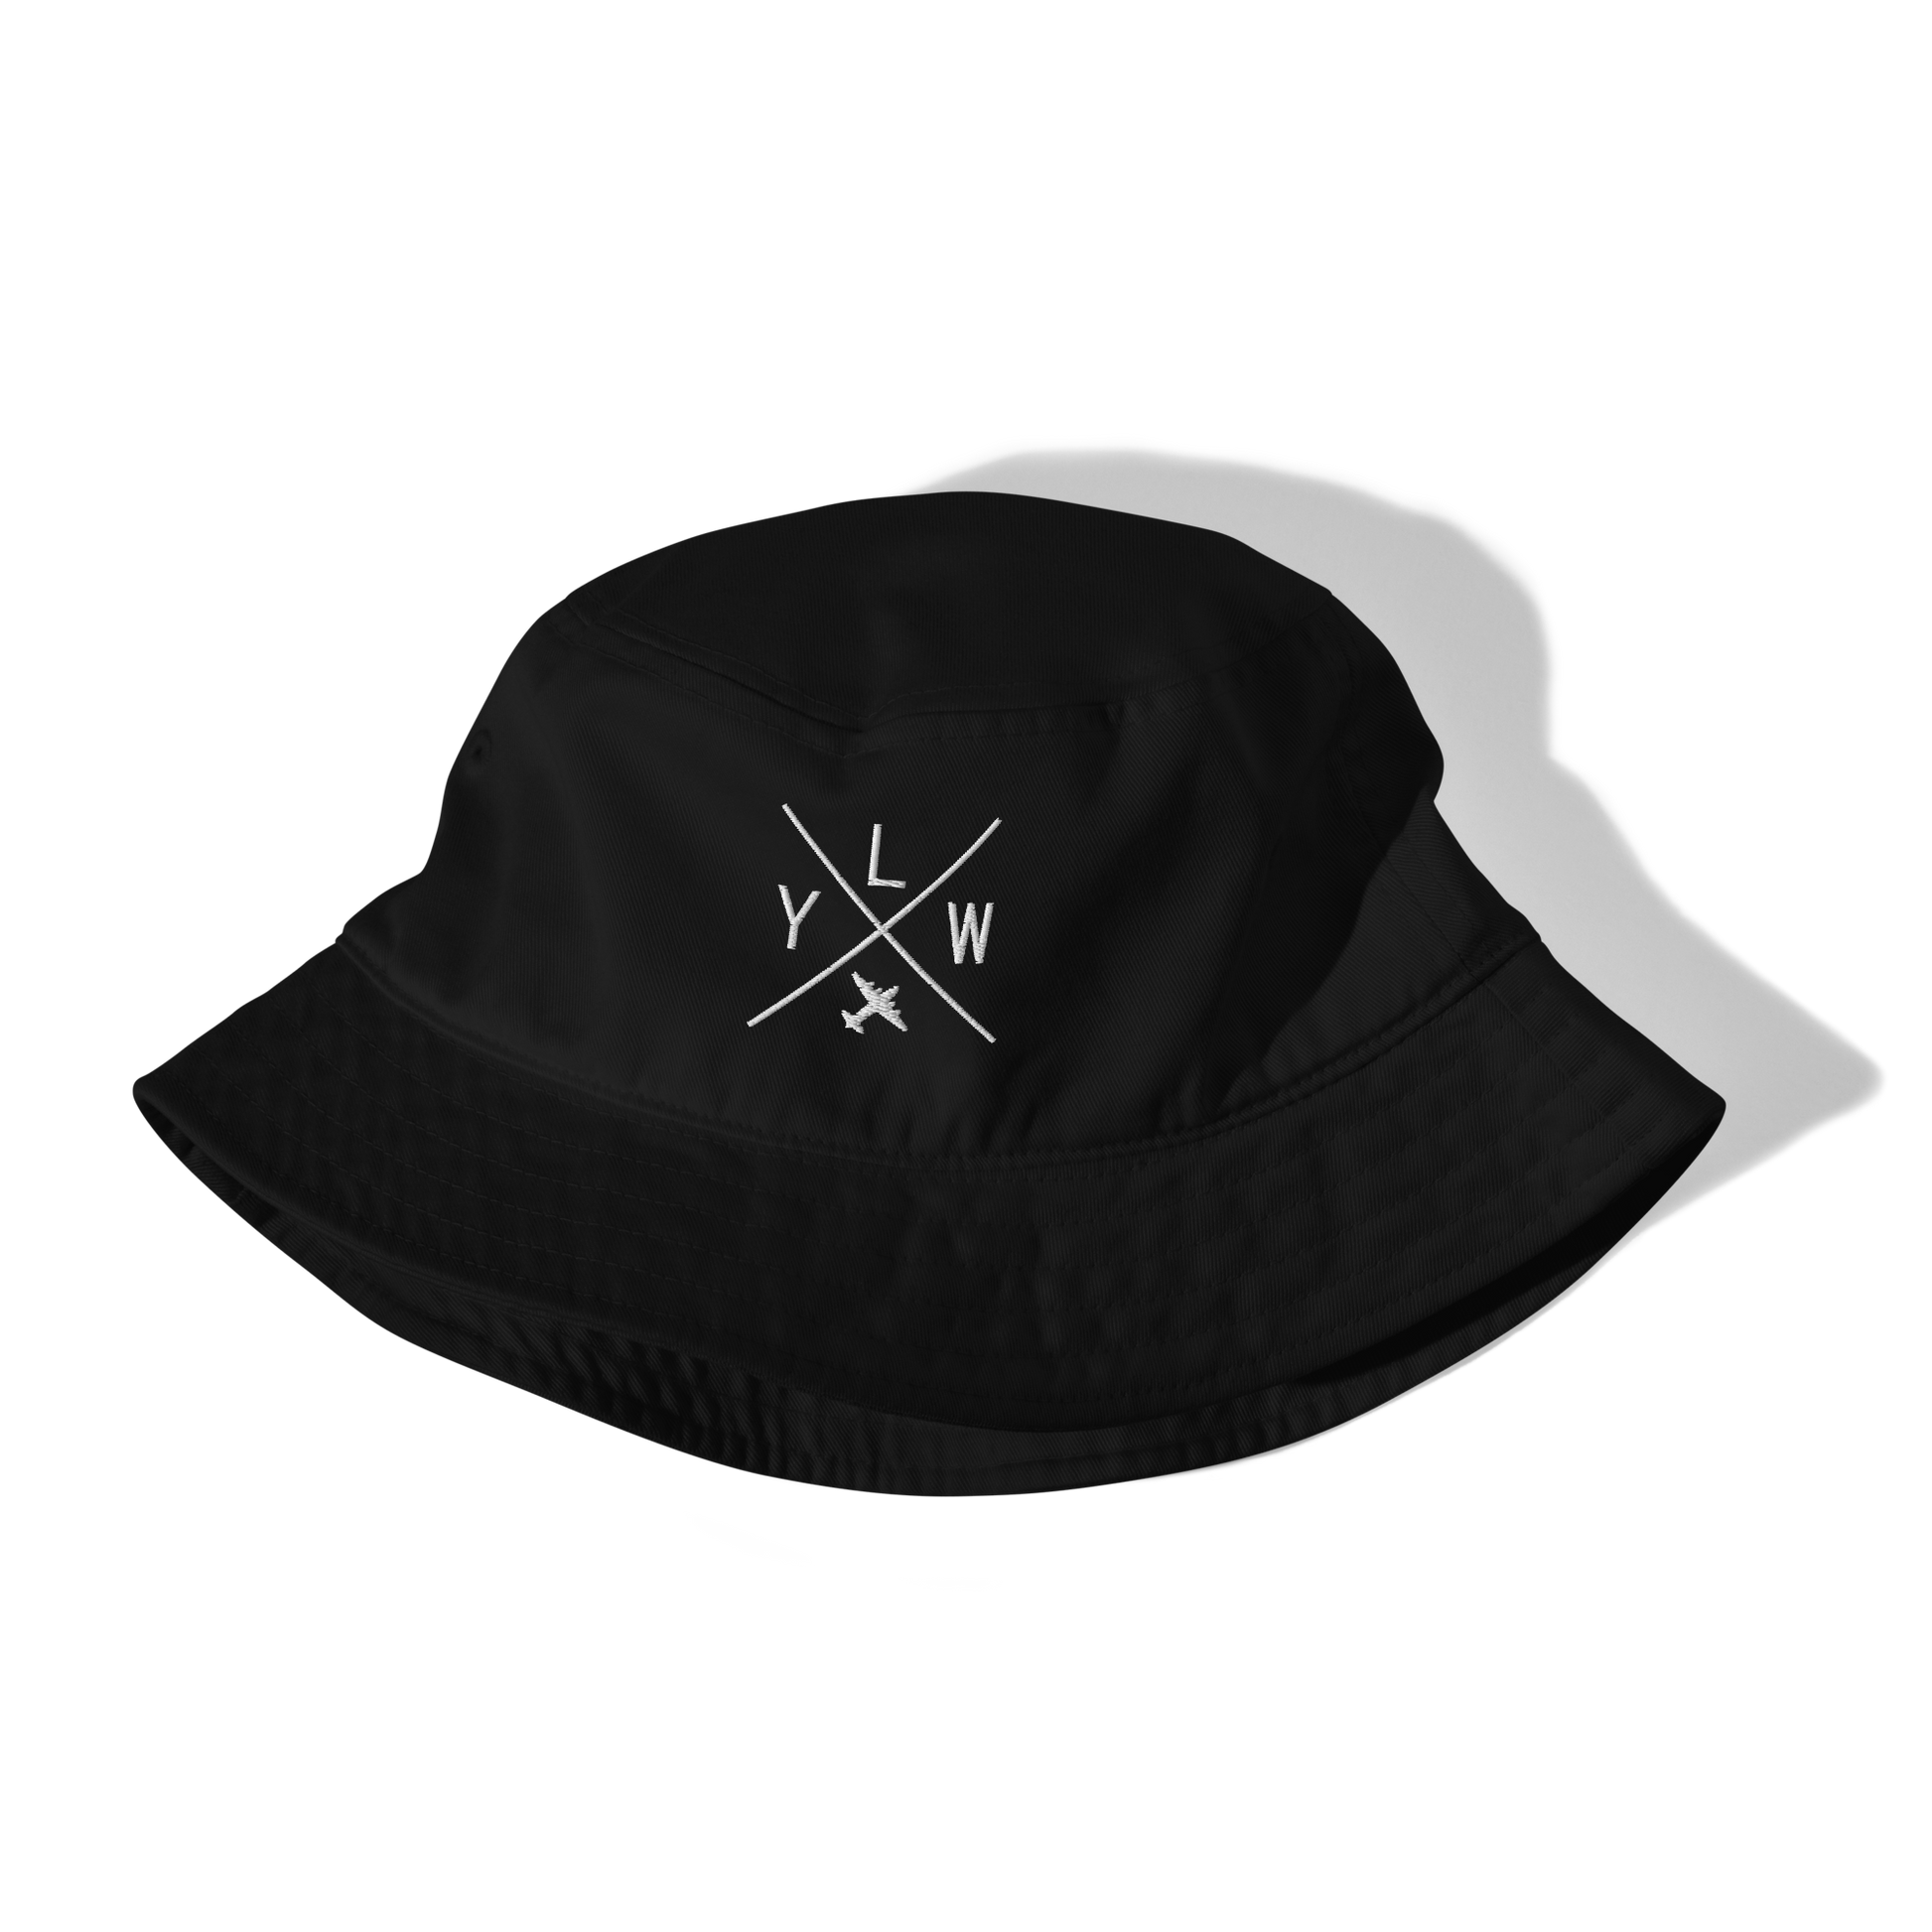 YHM Designs - YLW Kelowna Organic Cotton Bucket Hat - Crossed-X Design with Airport Code and Vintage Propliner - White Embroidery - Image 02